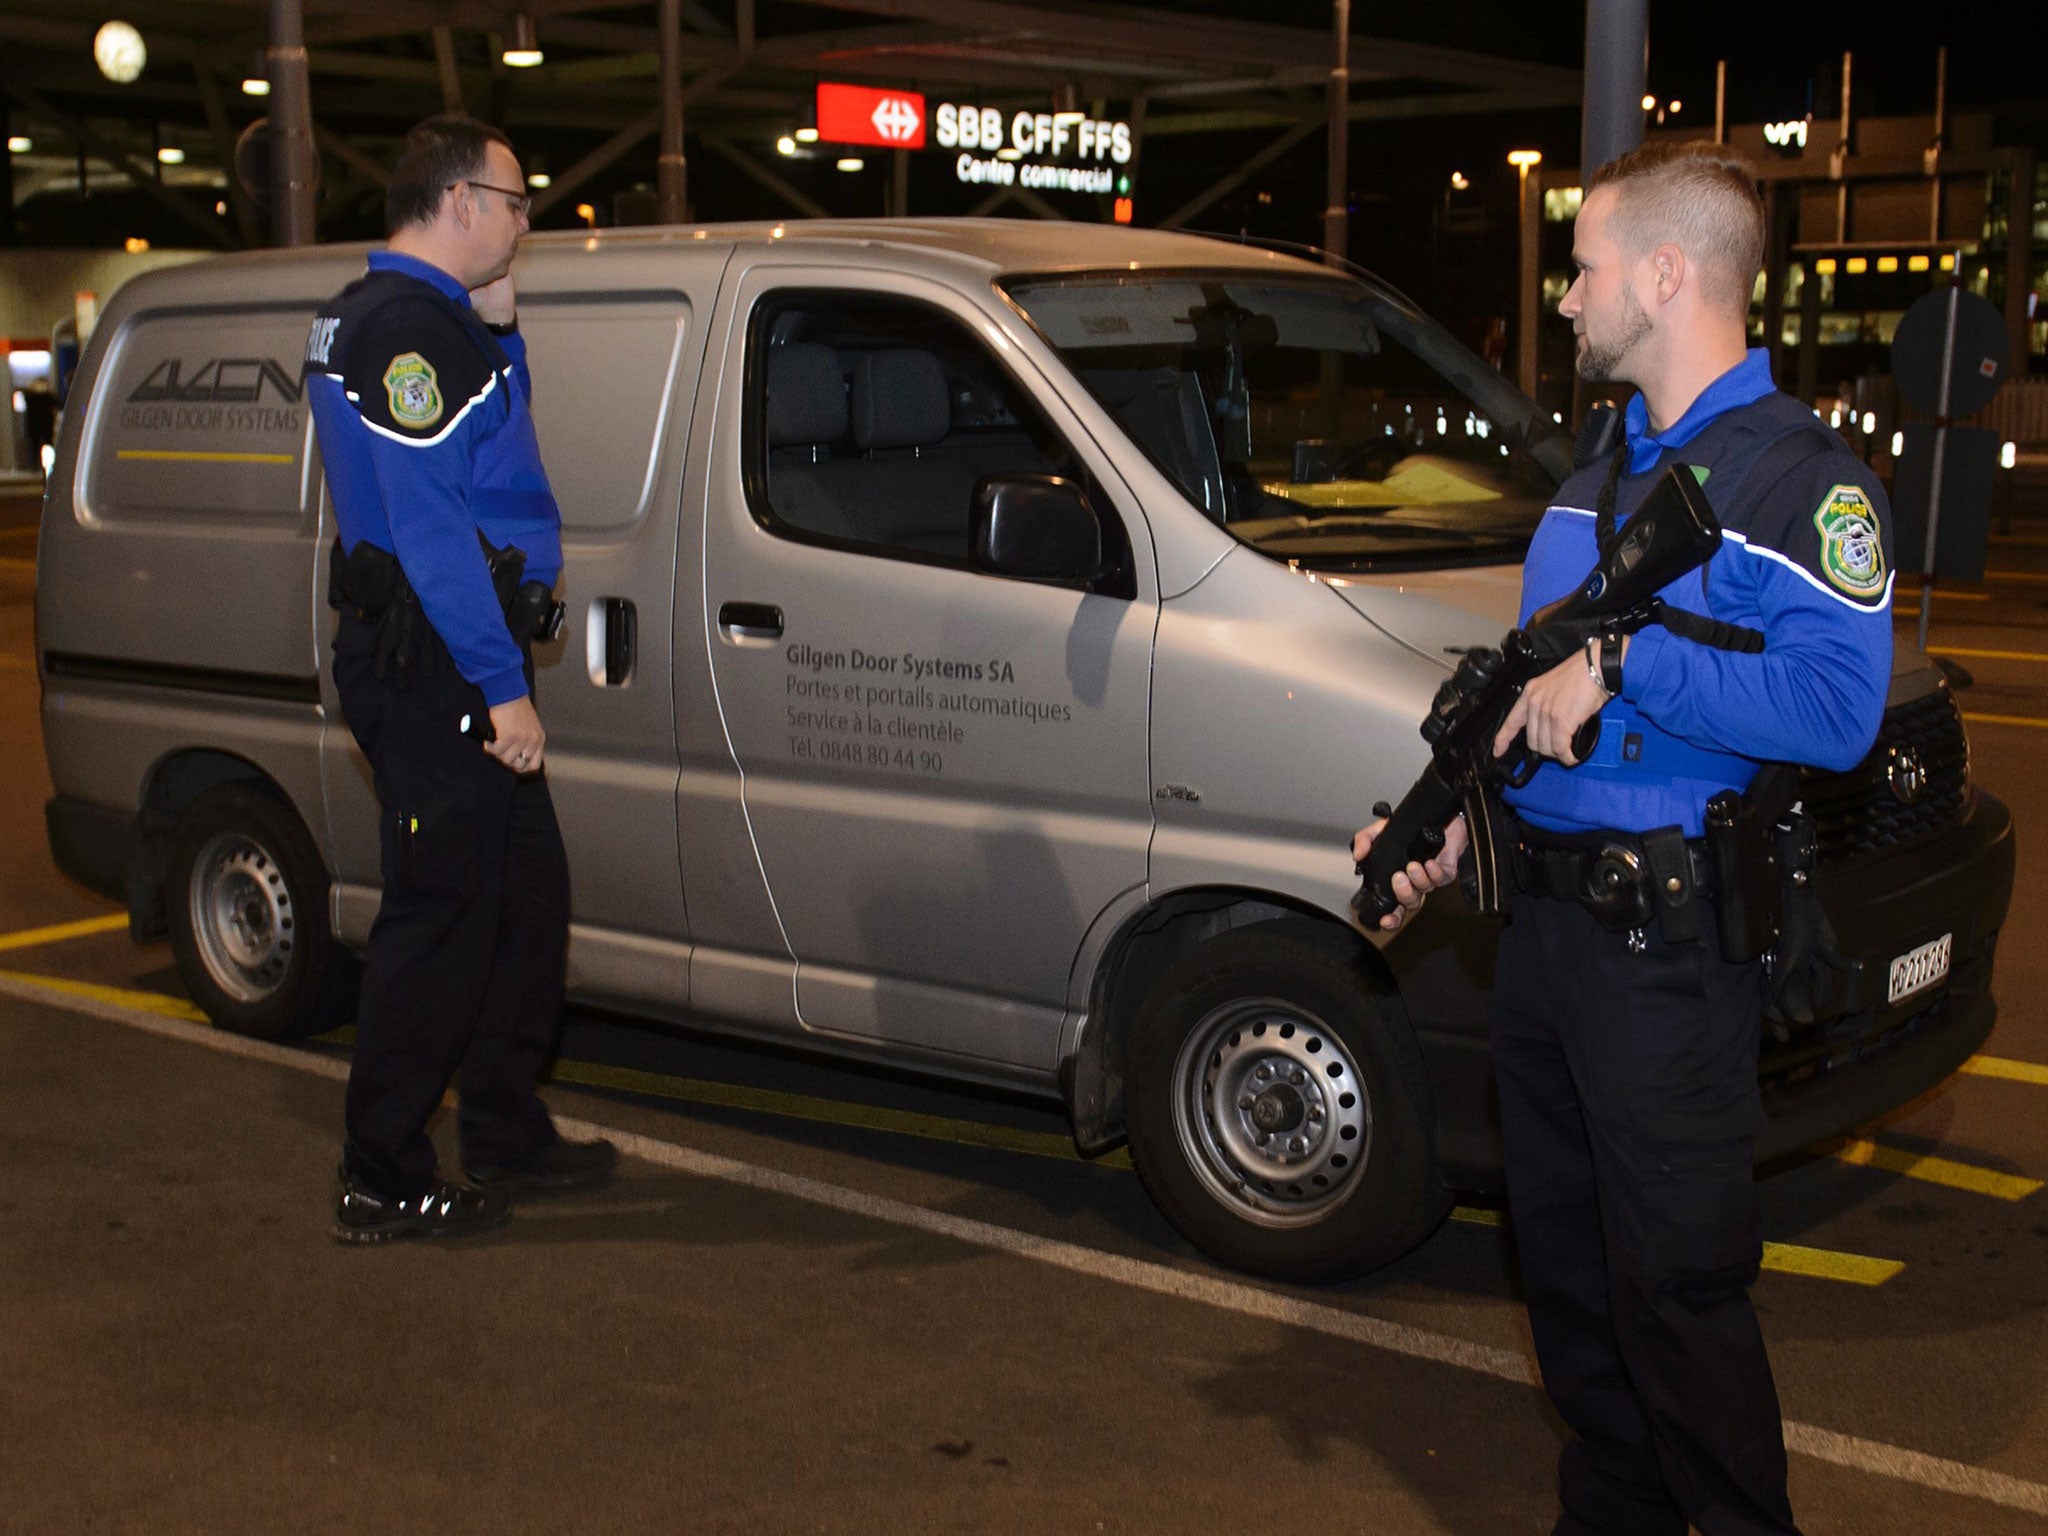 Security officers check a van at Geneva's airport on 10 December, 2015, after police raised the alert level and searched the city for several suspected jihadists believed to have links to Isis